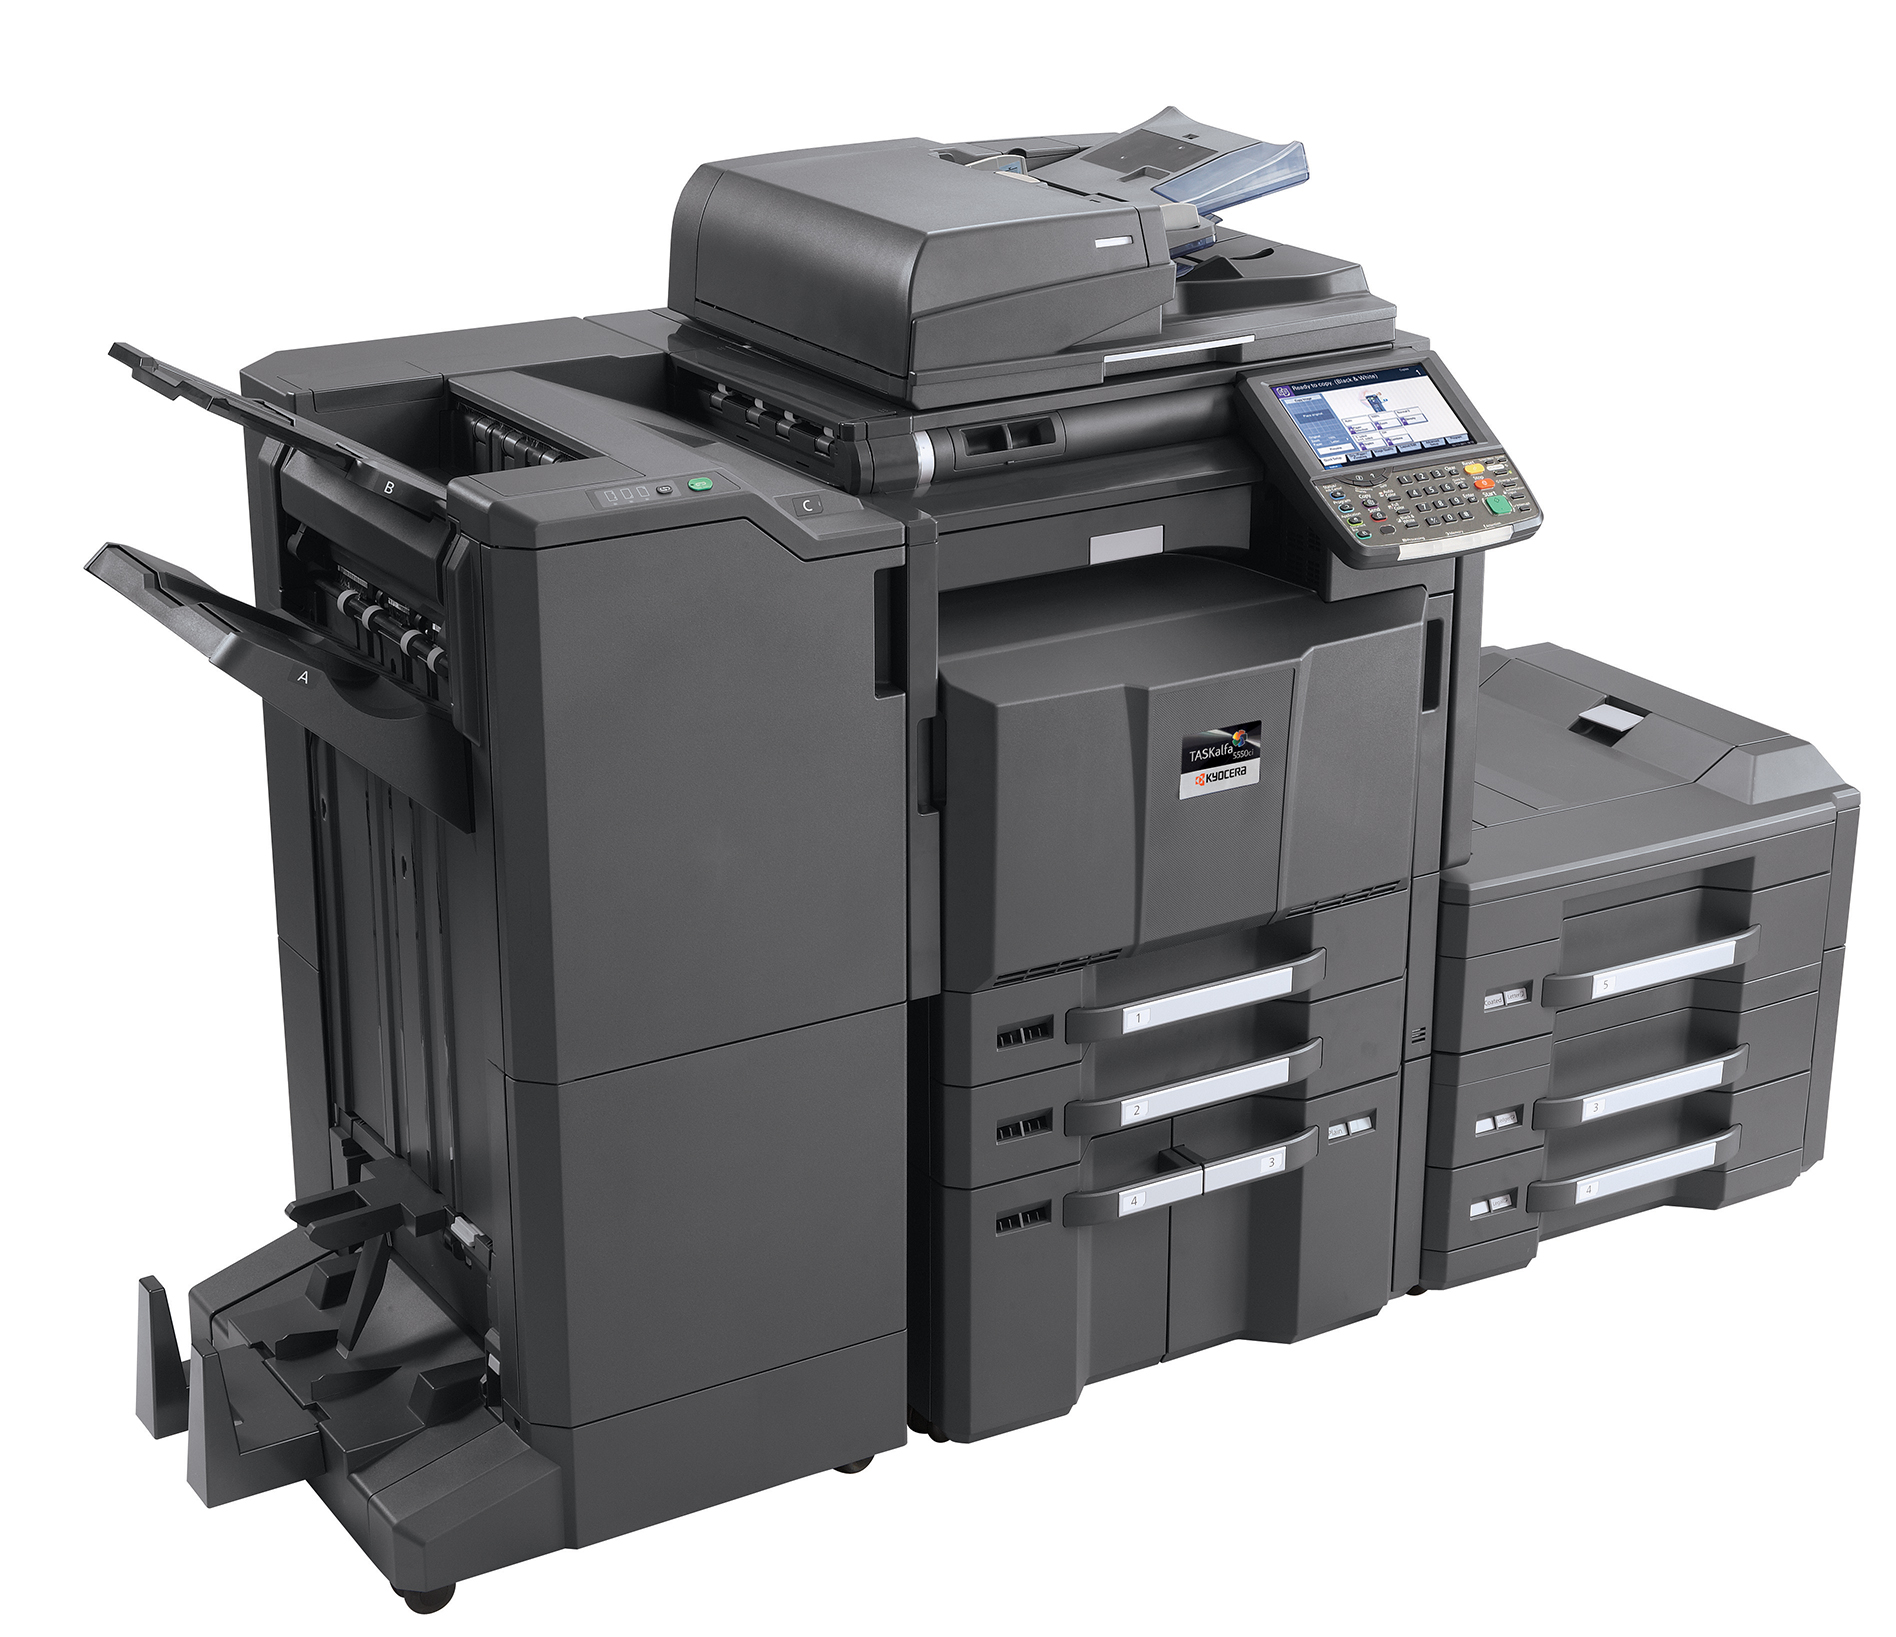 Kyocera Document Solutions America Wins Ten Buyers Laboratory Winter Pick 15 Awards For Outstanding Multifunctional Products And Energy Efficiency Copier Printer Sales Repair Rentals